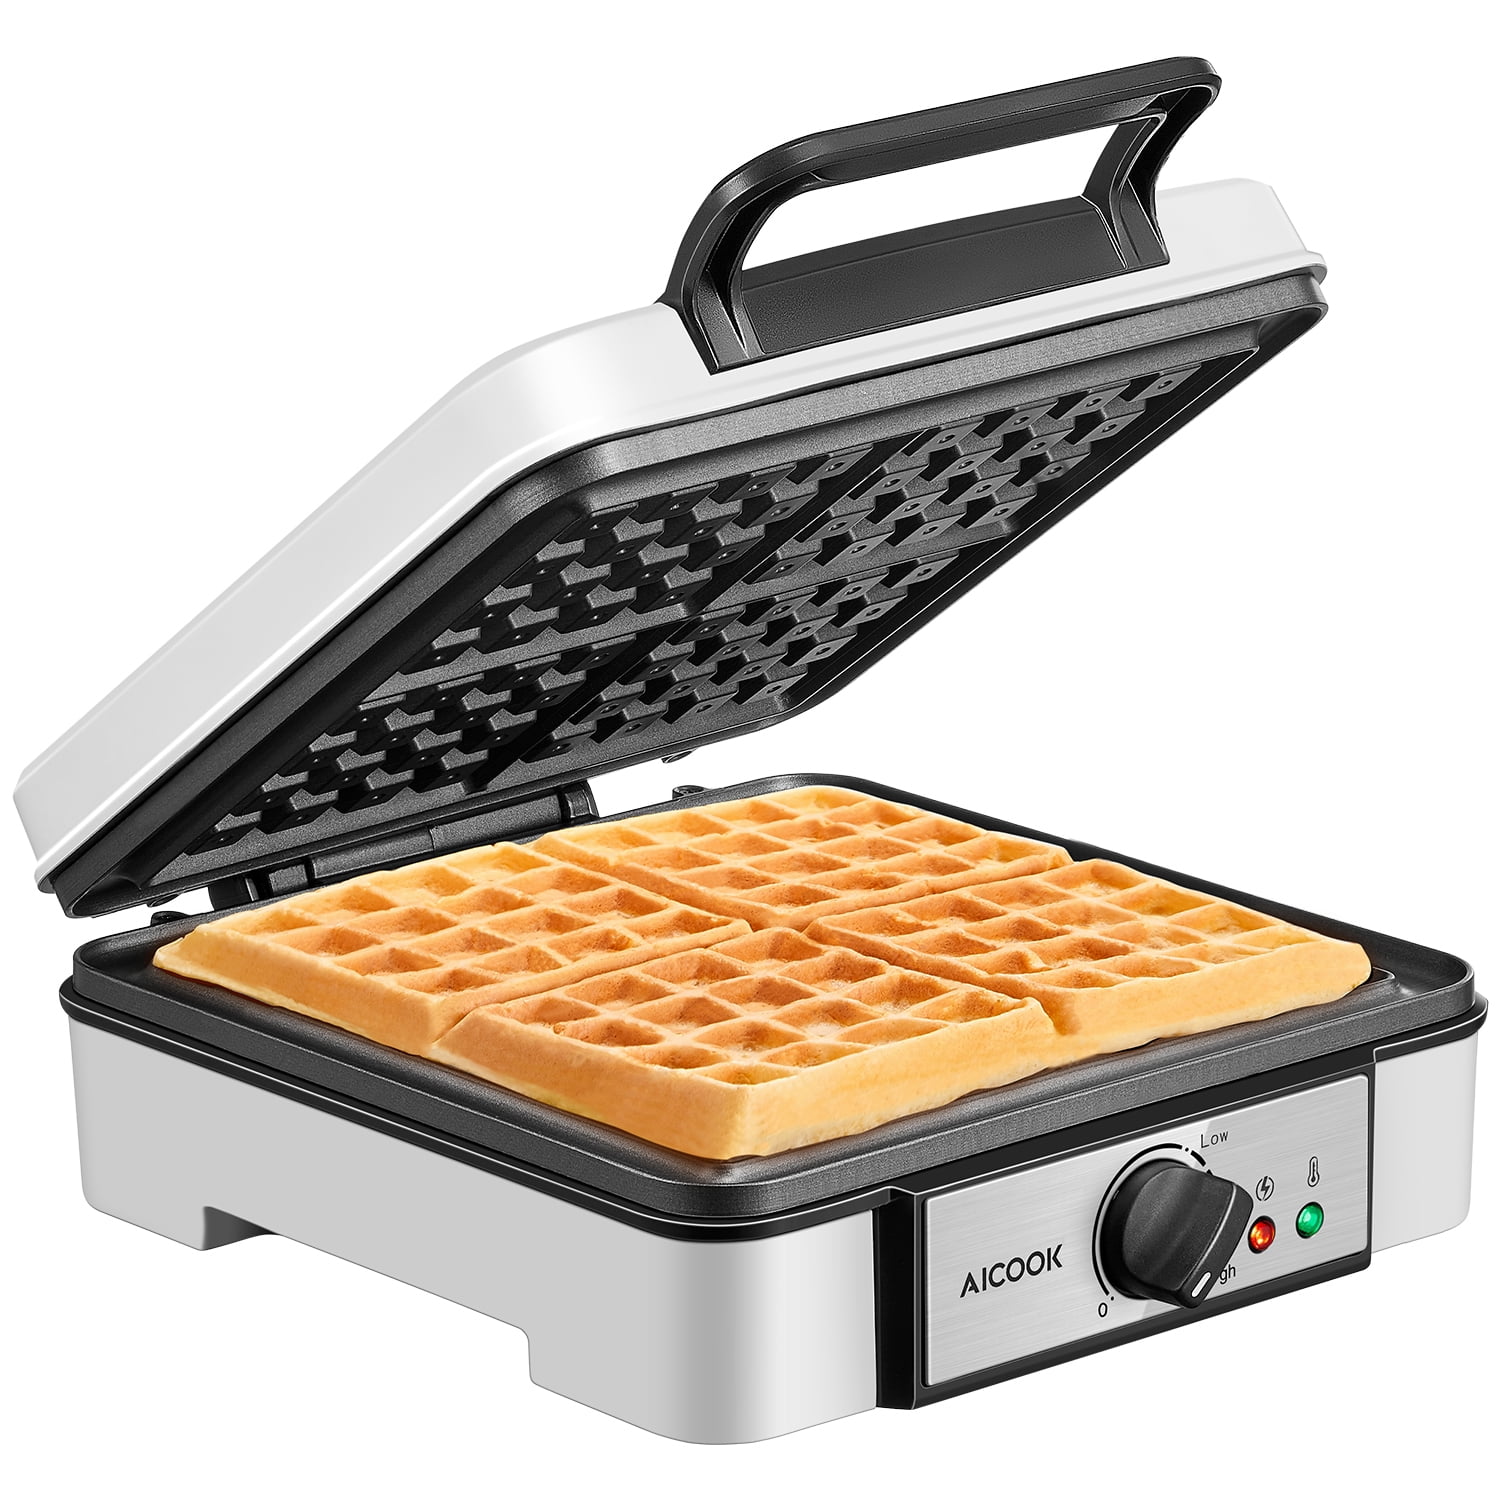 Dash Mini Waffle Maker: Non-Stick, 4 inch Cooking Surface, Silver  851843006434